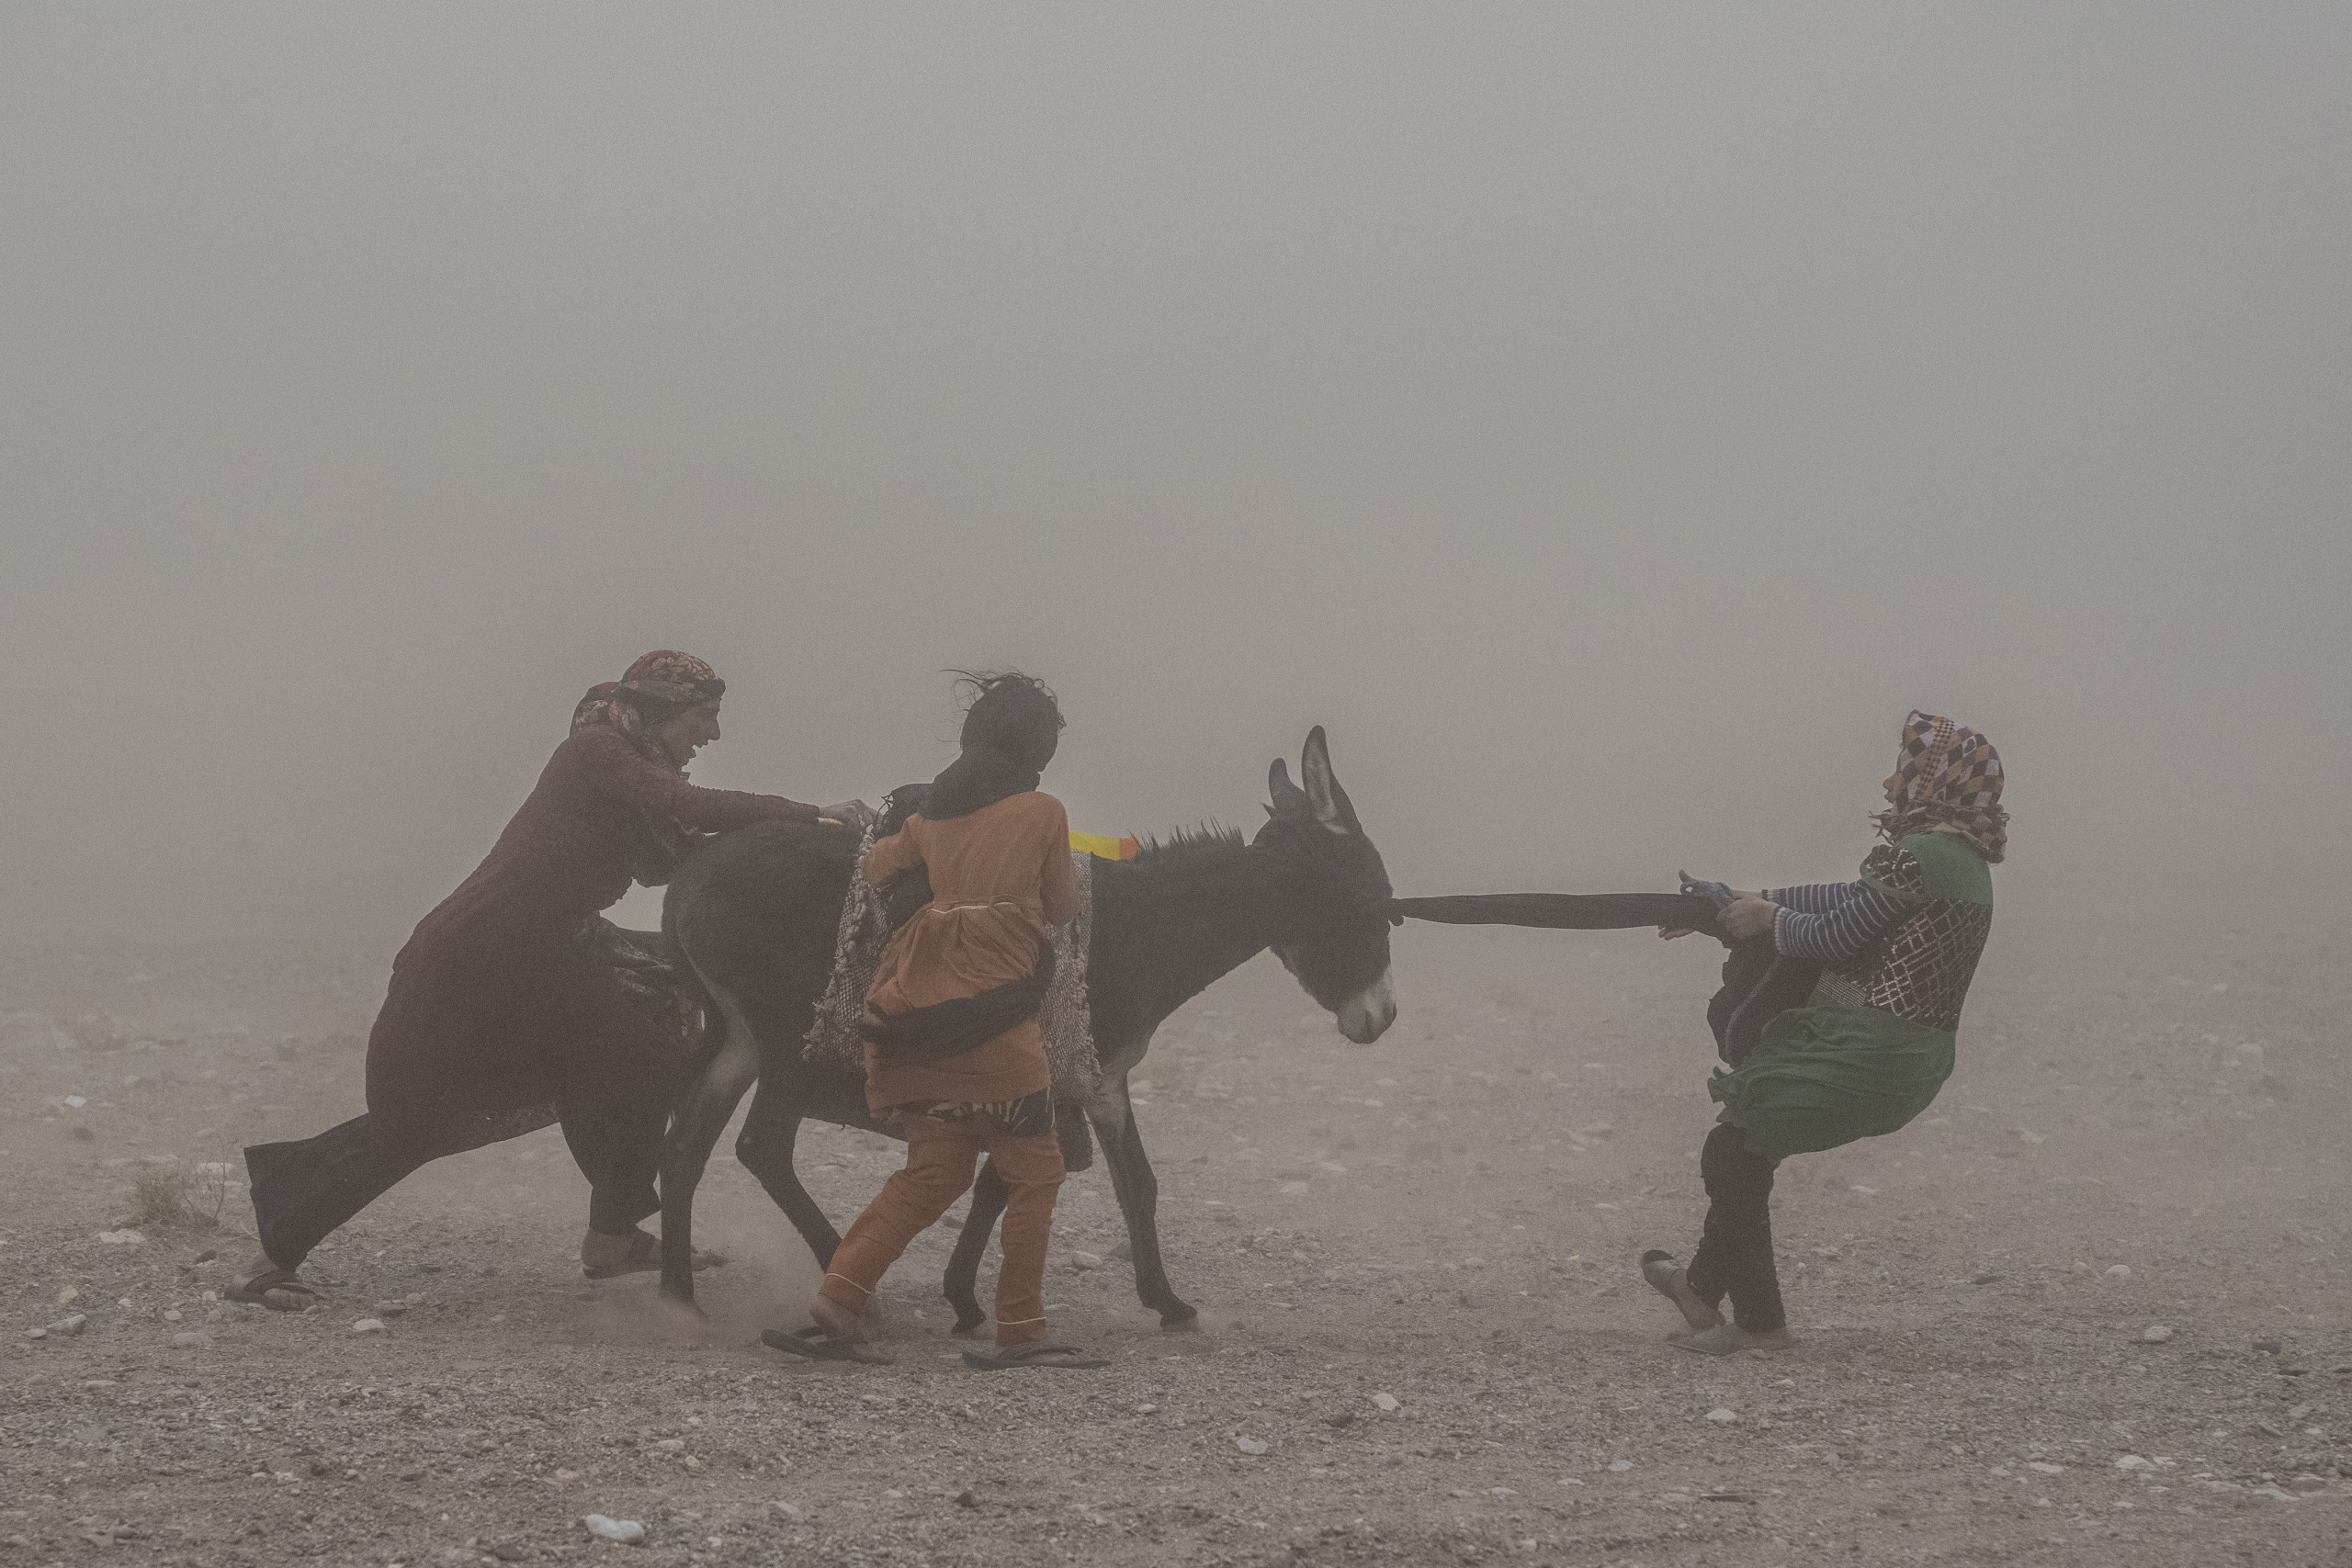 Afghan girls and women carry donated aid to their tents, while they are scared and crying from the fierce sandstorm, after an earthquake in Zenda Jan district in Herat province, western of Afghanistan, Thursday, Oct. 12, 2023. Another strong earthquake shook western Afghanistan on Wednesday morning after an earlier one killed more than 2,000 people and flattened whole villages in Herat province in what was one of the most destructive quakes in the country's recent history. (AP Photo/Ebrahim Noroozi)

Associated Press/LaPresse
Only Italy and Spain